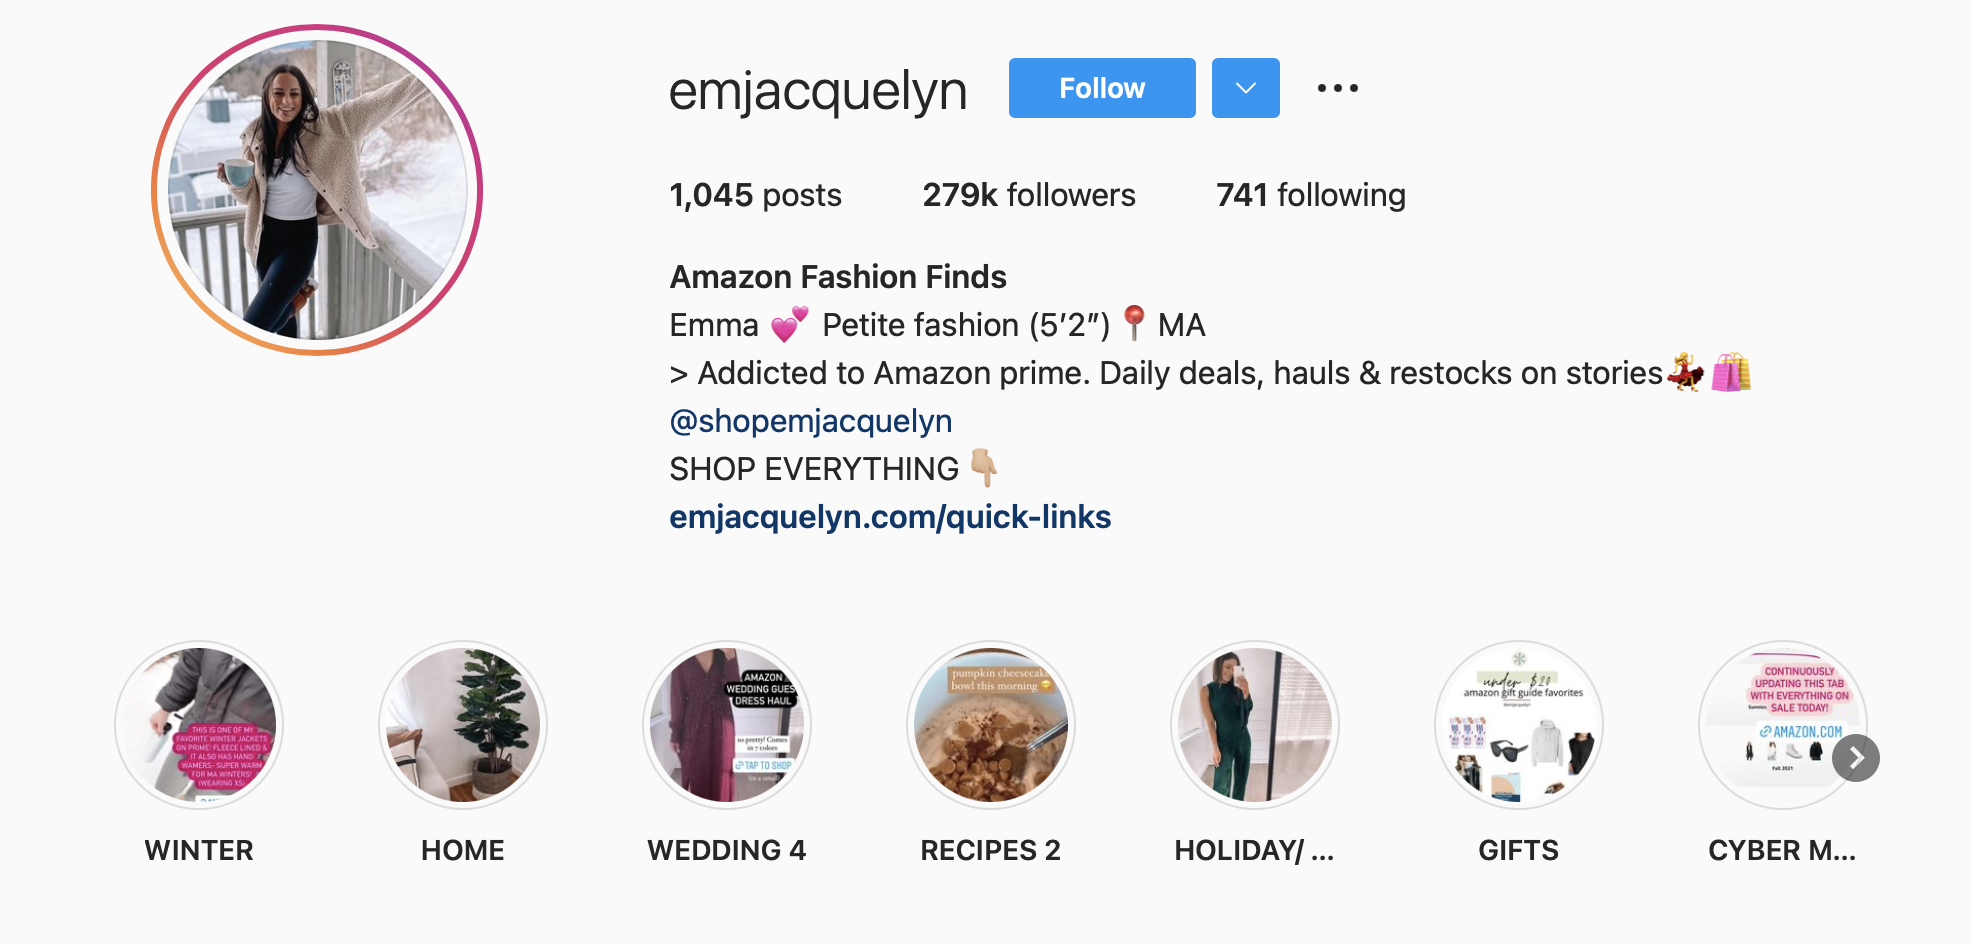 Emma   Fashion Finds (@emjacquelyn) • Instagram photos and videos